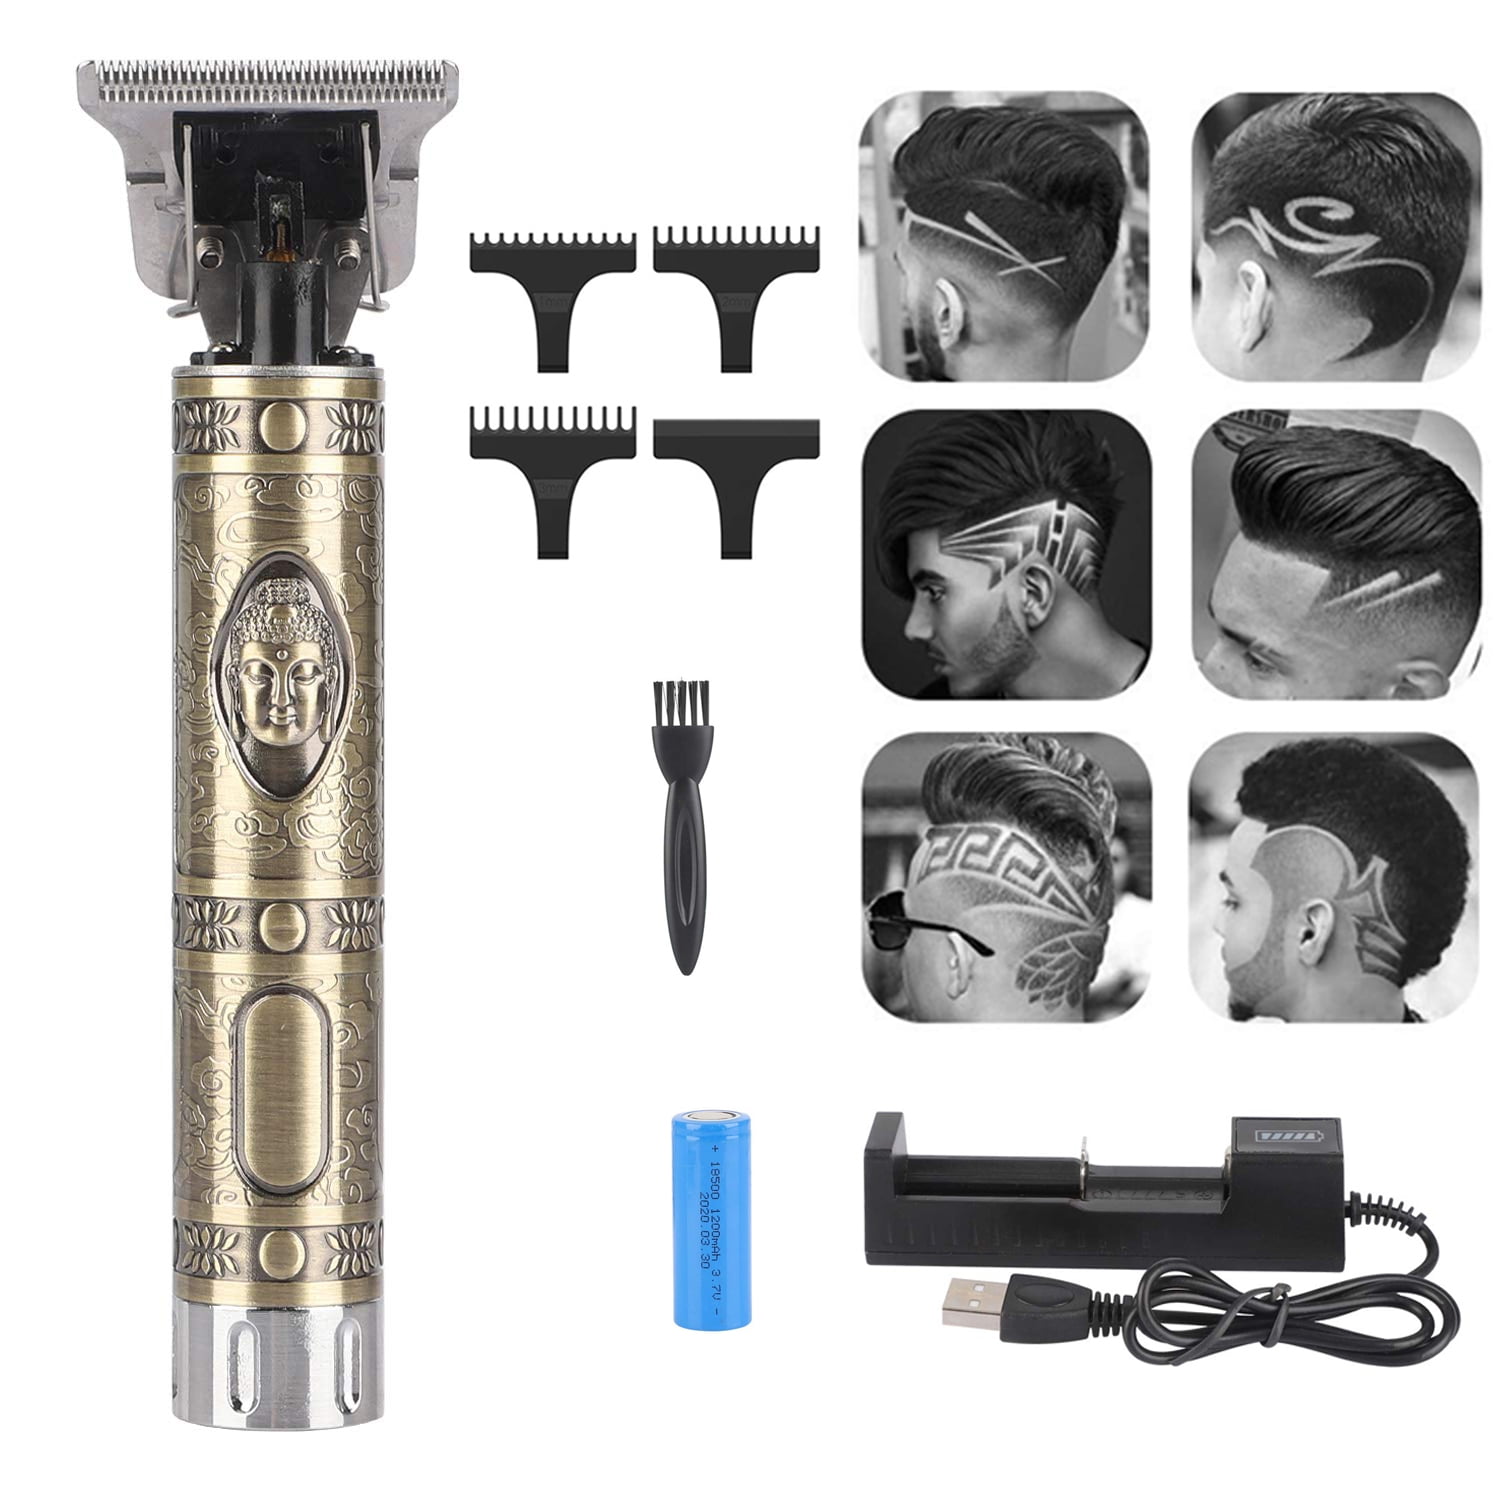 Hair Clippers for Men,Cordless Rechargeable Electric Pro Li T-Liner Clippers for Hair Cutting,Mens Hair Trimmer Beard Trimmer Hair Grooming Kit,with 4 Guide Combs,1 Pack,Bronze